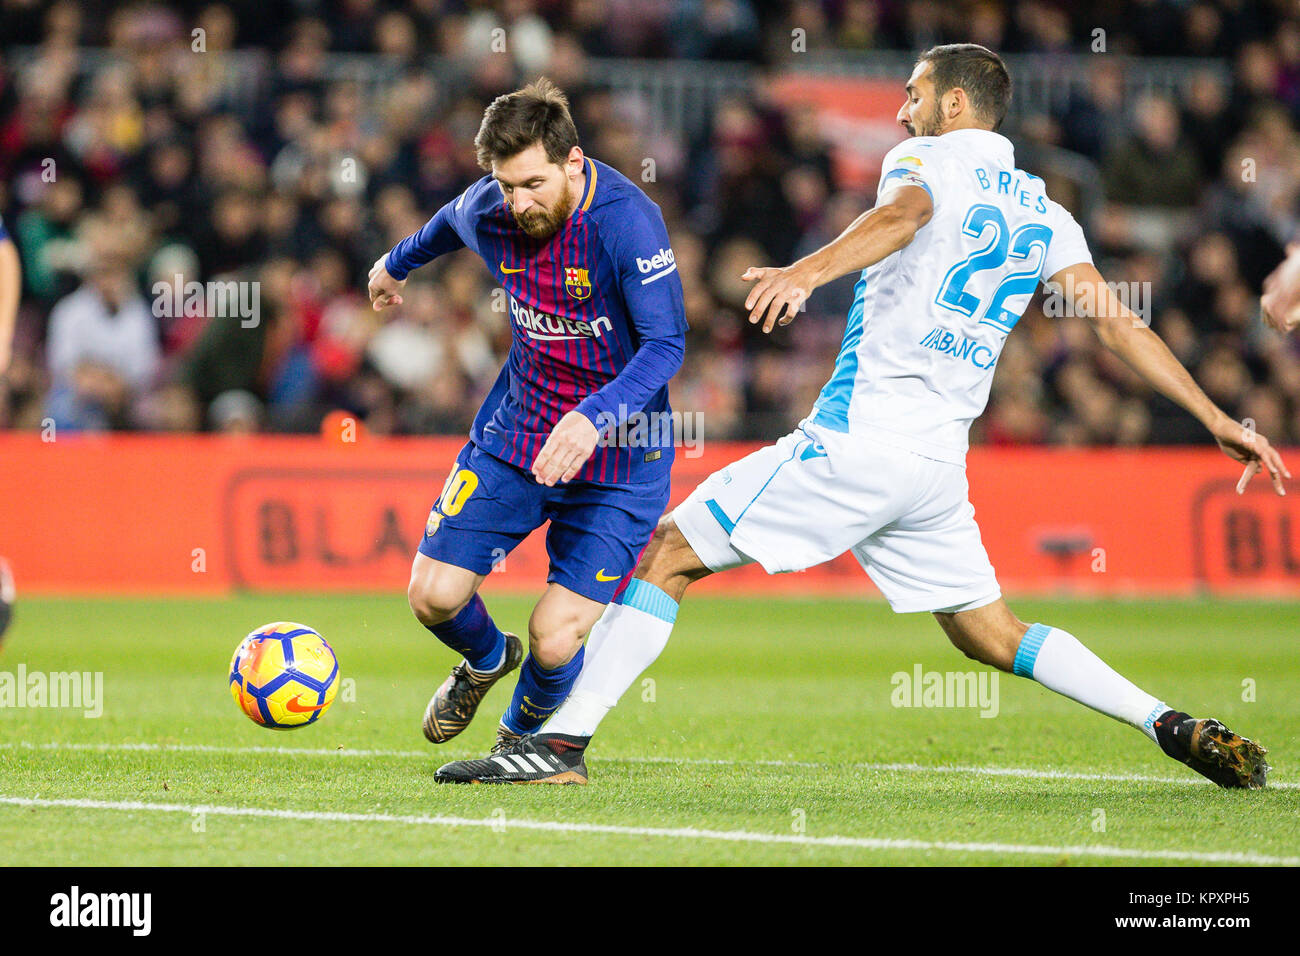 Barcelona, Spain. 17th Dec, 2017. SPAIN - 17th of December: Barcelona forward Lionel Messi (10) and Deportivo La Coruna midfielder Celso Borges (22) during the match between FC Barcelona against Deportivo Coruna, for the round 16 of the Liga Santander, played at Camp Nou Stadium on 17th December 2017 in Barcelona, Spain. (Credit: GTO/Urbanandsport/Gtres Online) Credit: Gtres Información más Comuniación on line, S.L./Alamy Live News Stock Photo